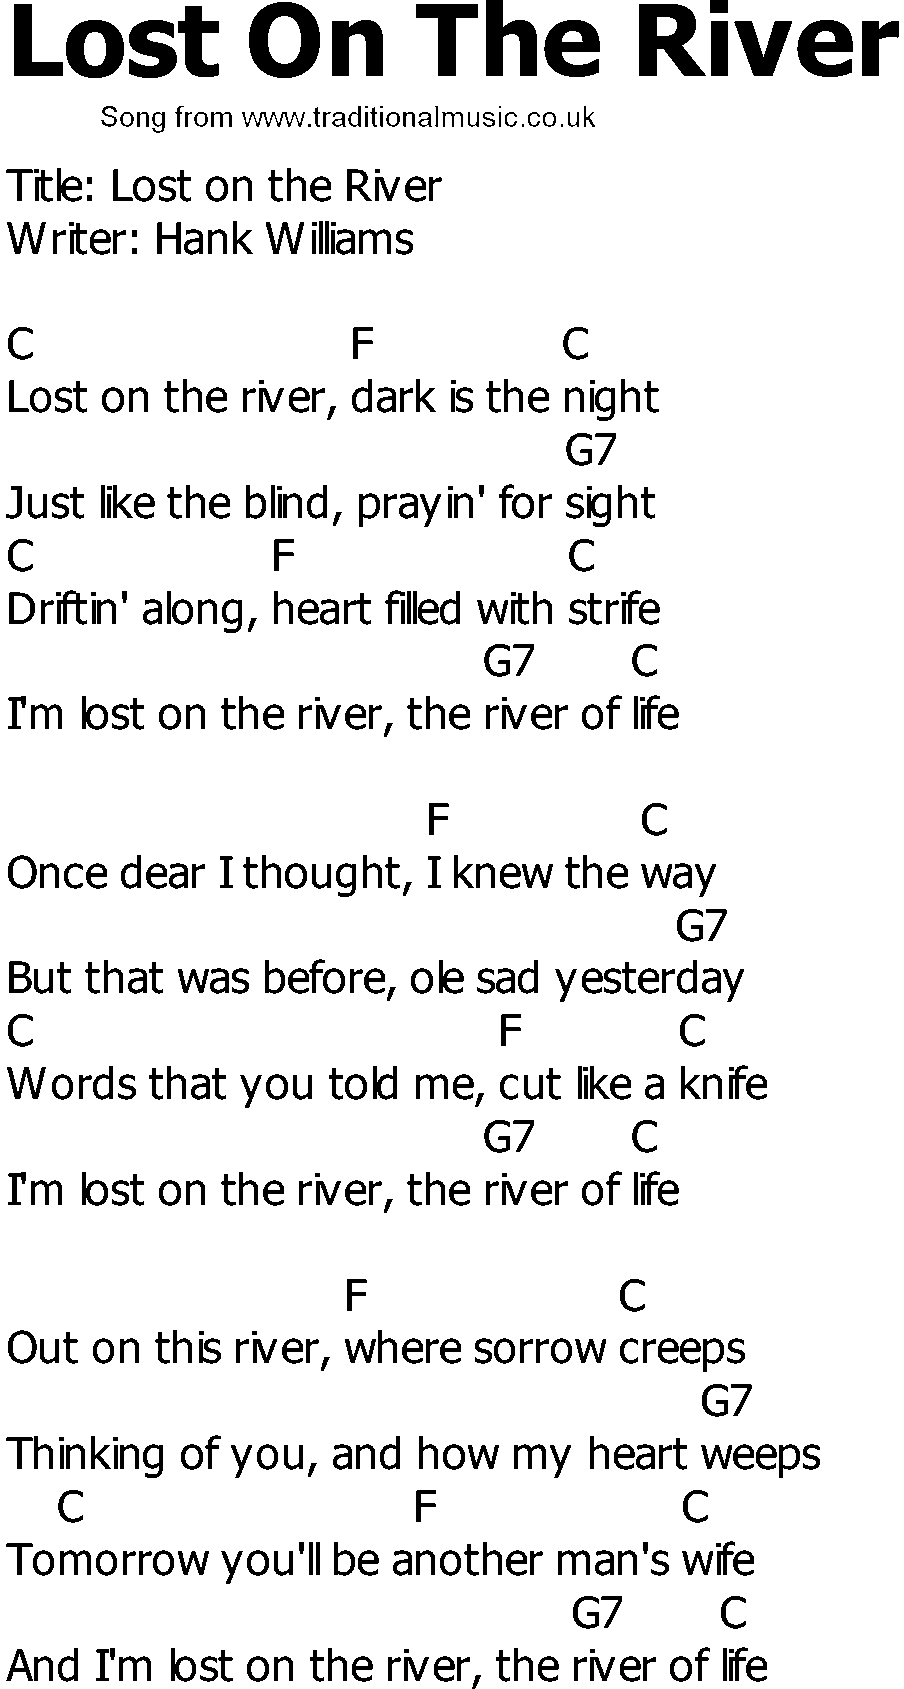 Old Country song lyrics with chords - Lost On The River